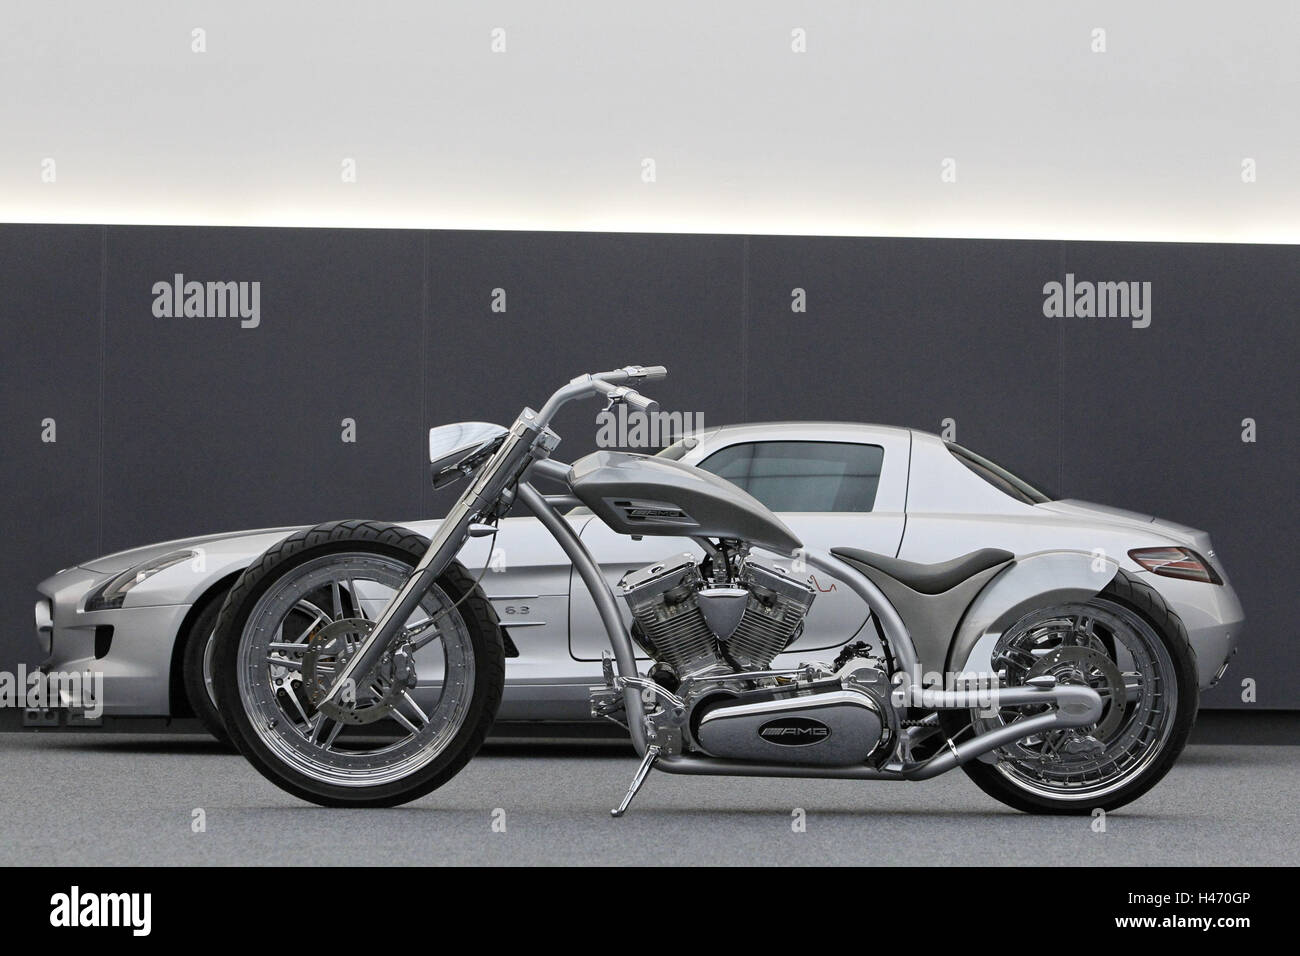 Motorcycle, chopper AMG, design motorcycle, car, Mercedes AMG Wing door model SLS in the background, silver, Stock Photo